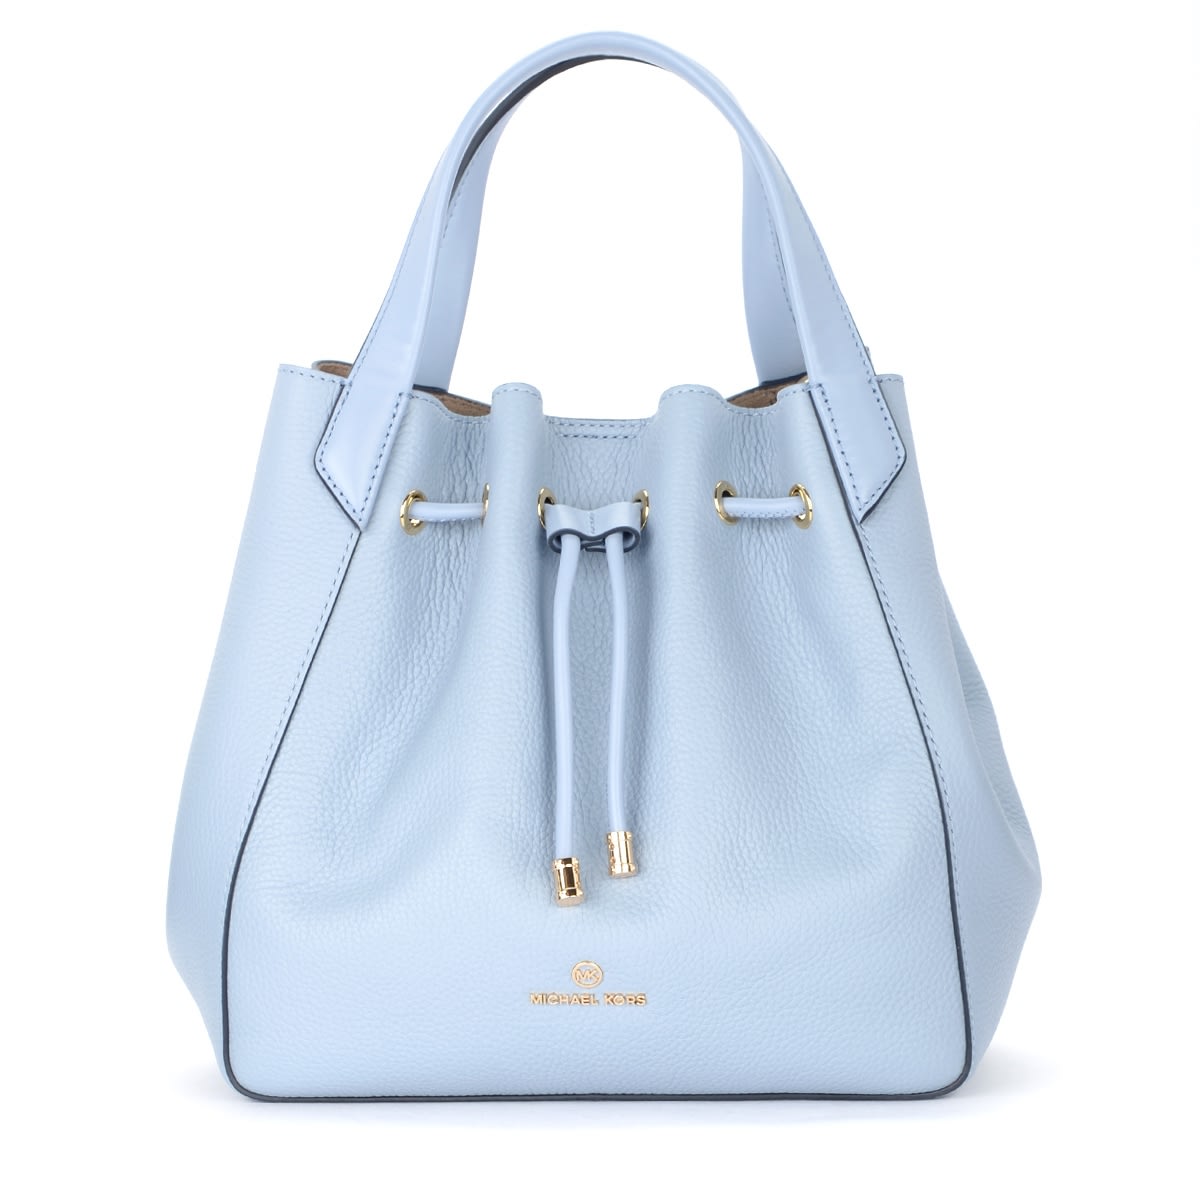 Michael Kors Phoebe Large Tote Bag In Light Blue Leather